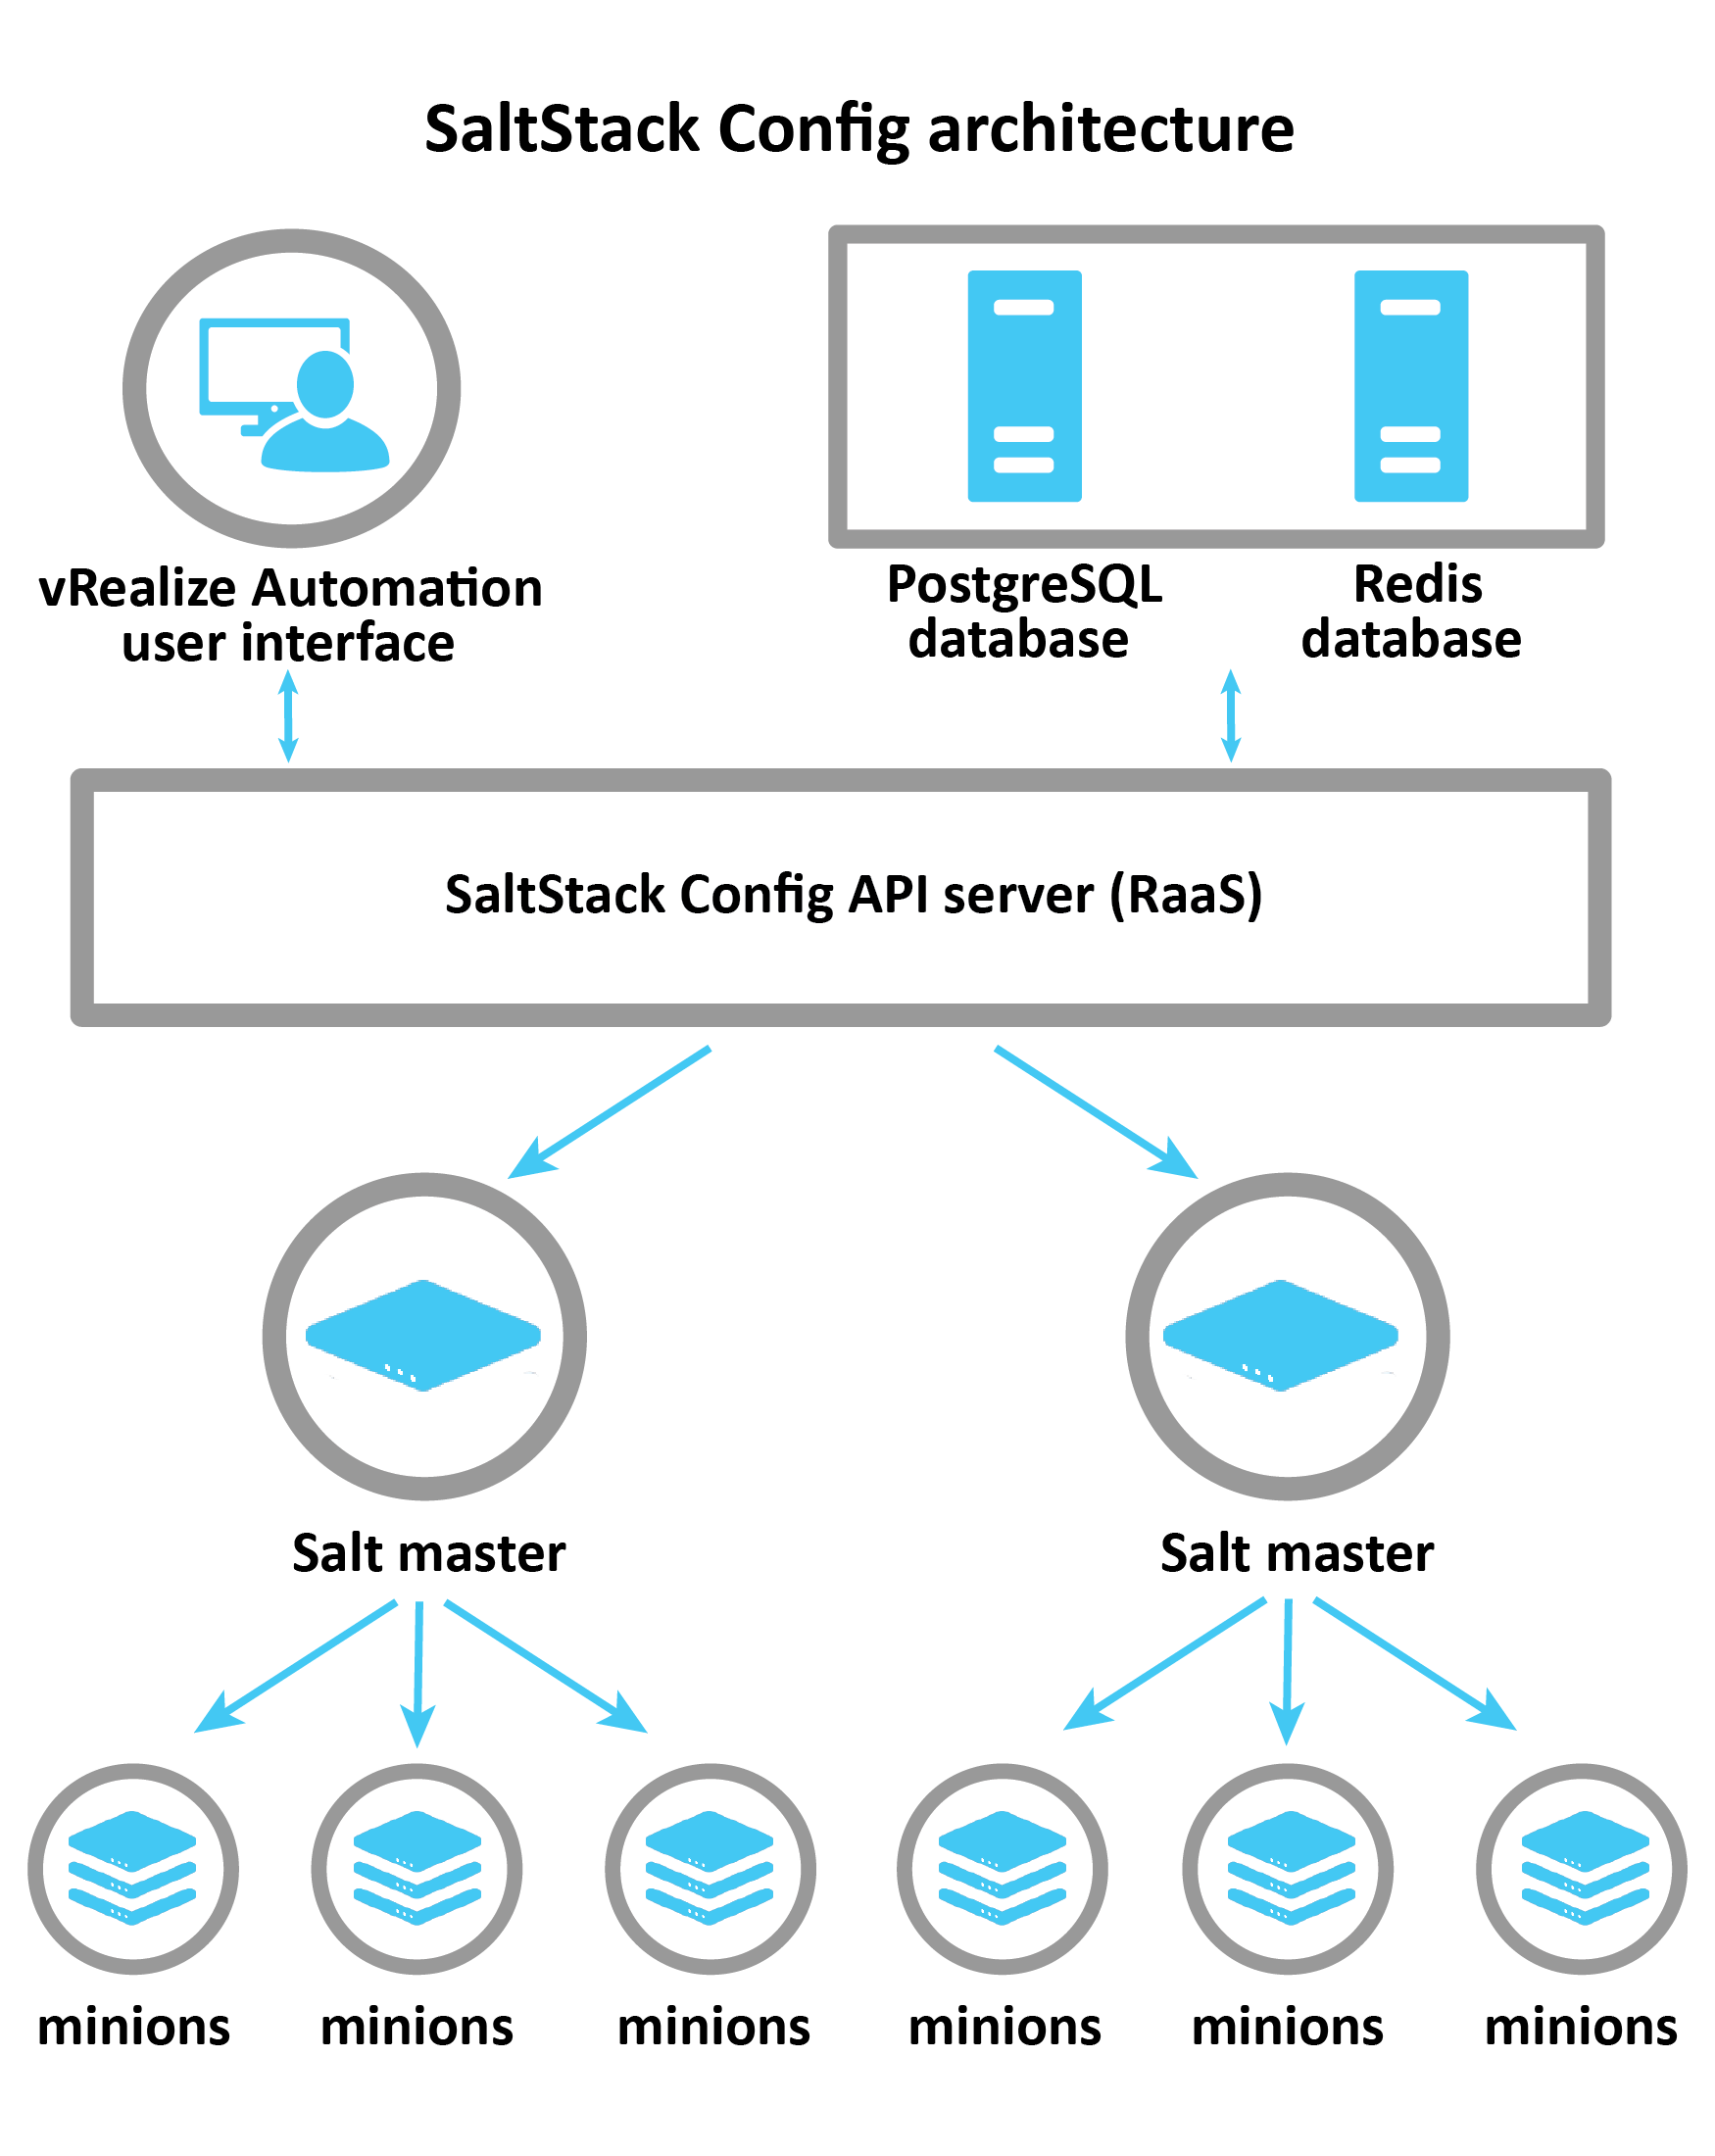 An architecture diagram that shows the different components of SaltStack Config